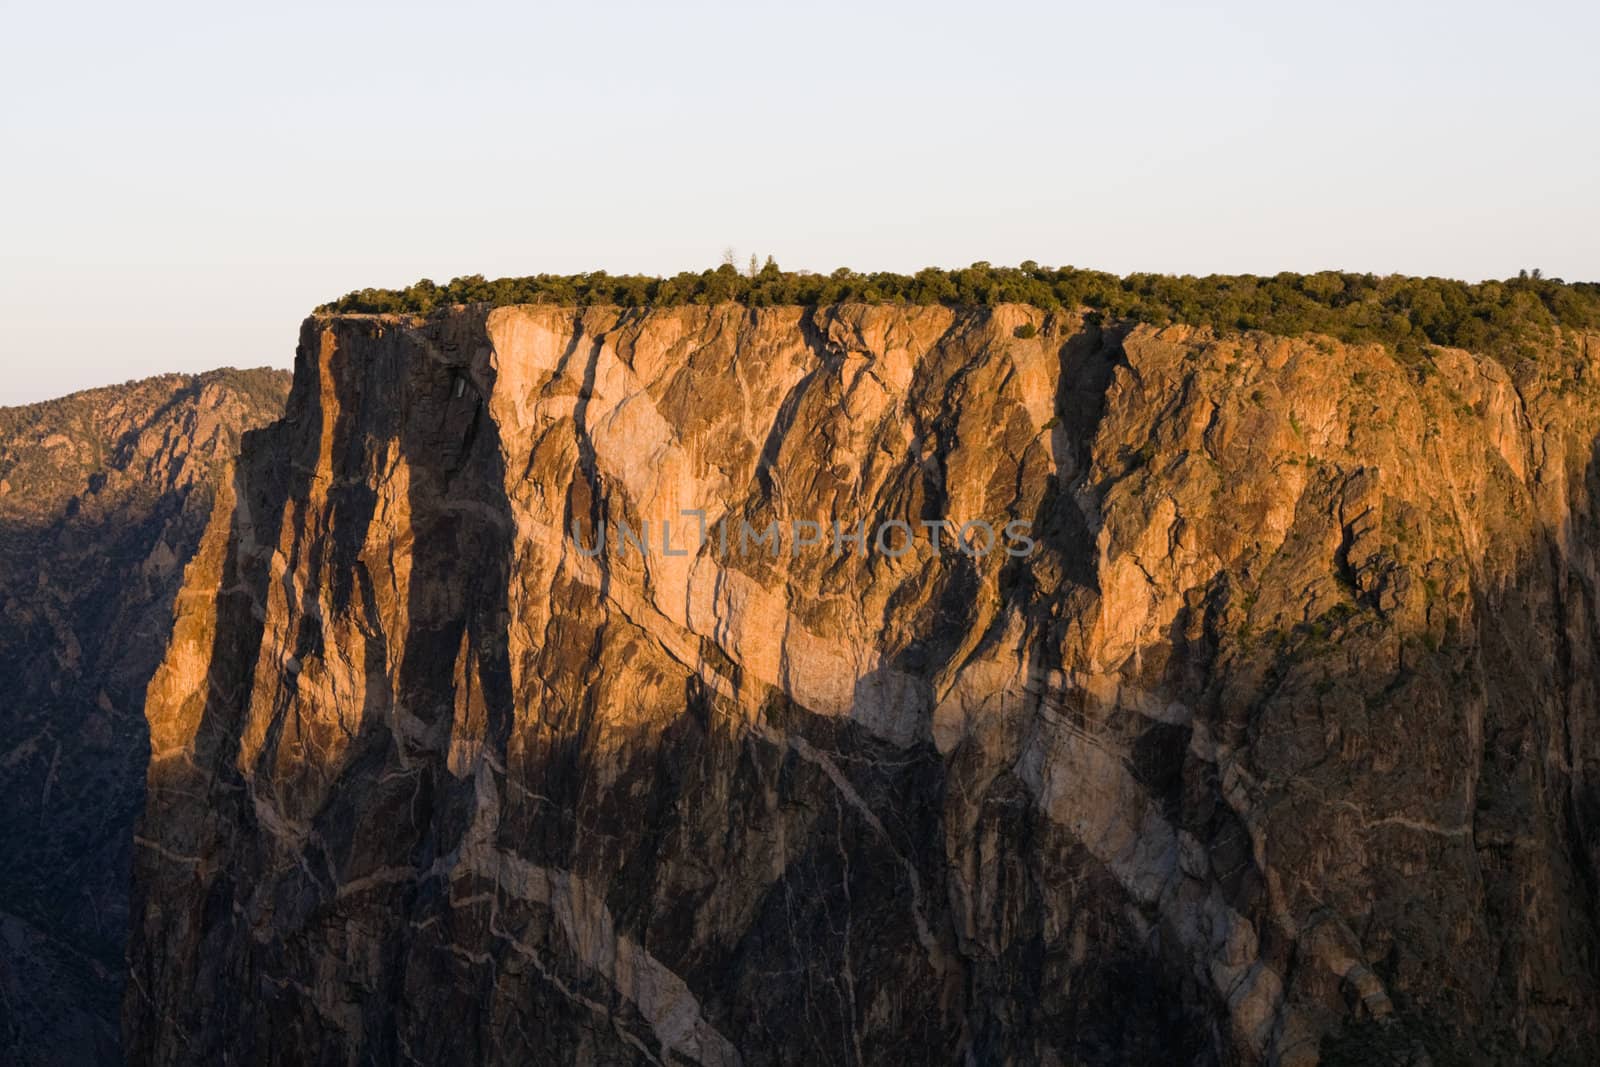 Rock Details in Black Canyon of the Gunnison by benkrut